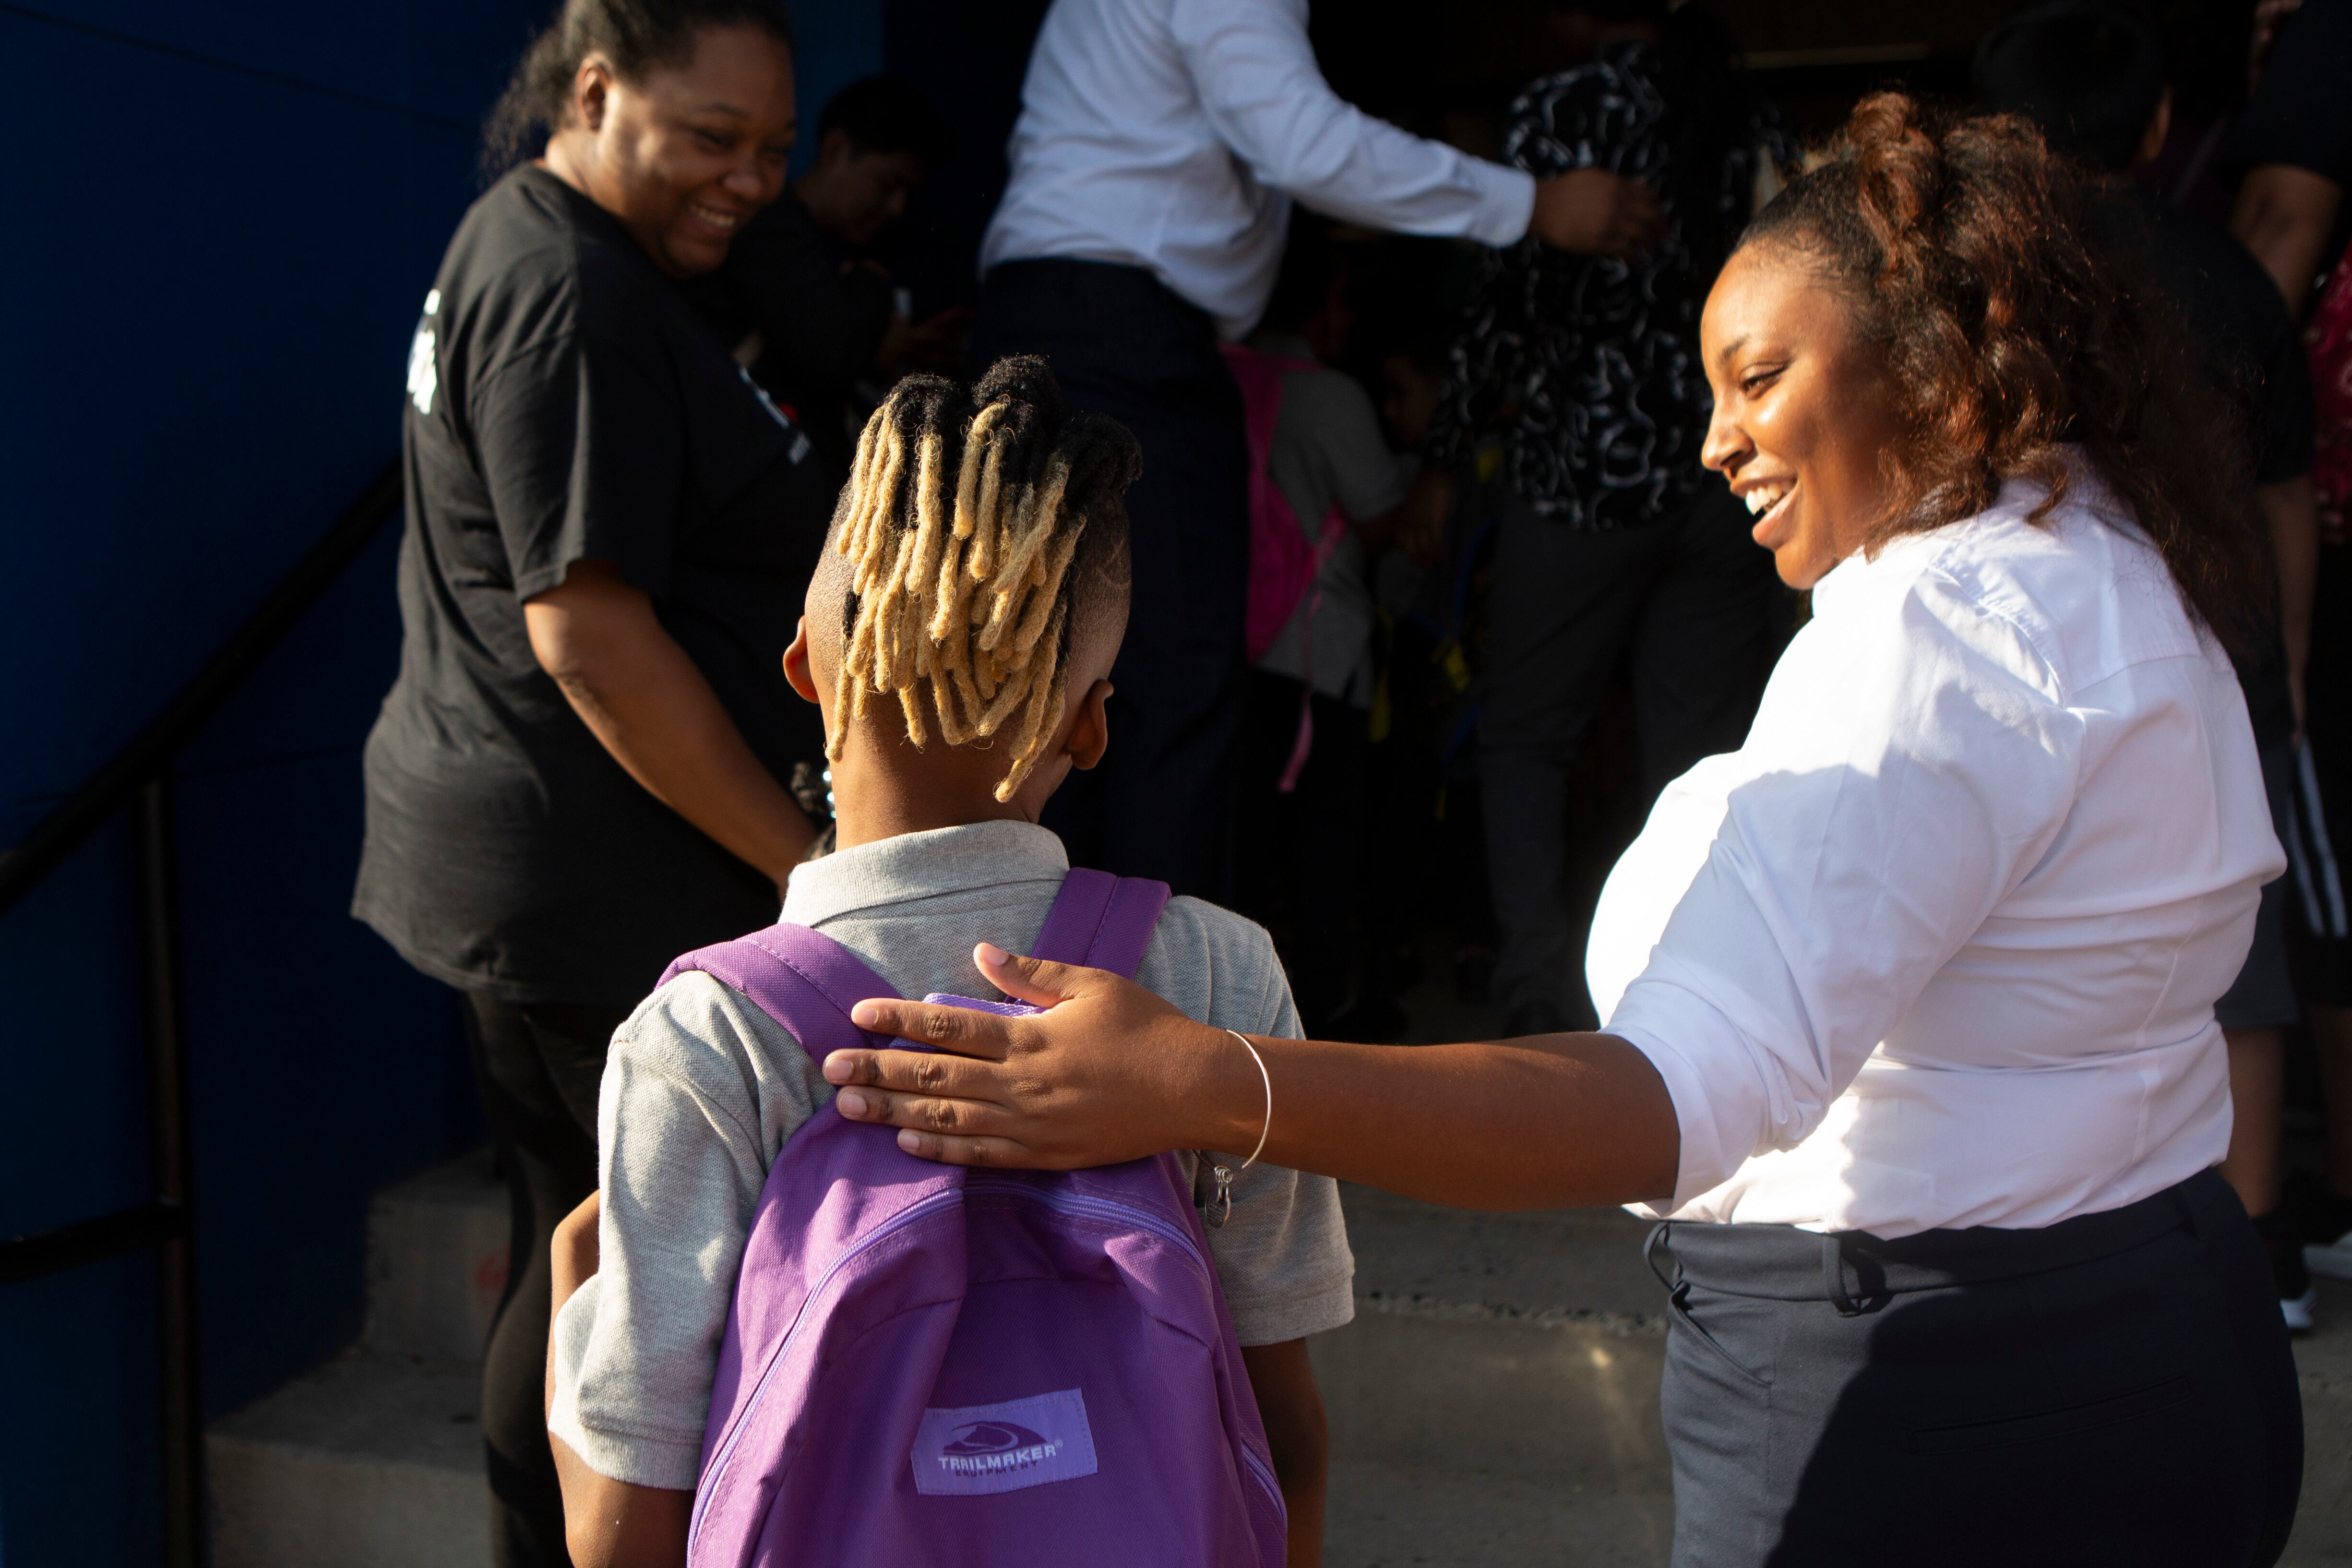 An adult with long hair and wearing a white blouse places her hand on a student's shoulder. The student has long hair in a ponytail and wearing a purple backpack.